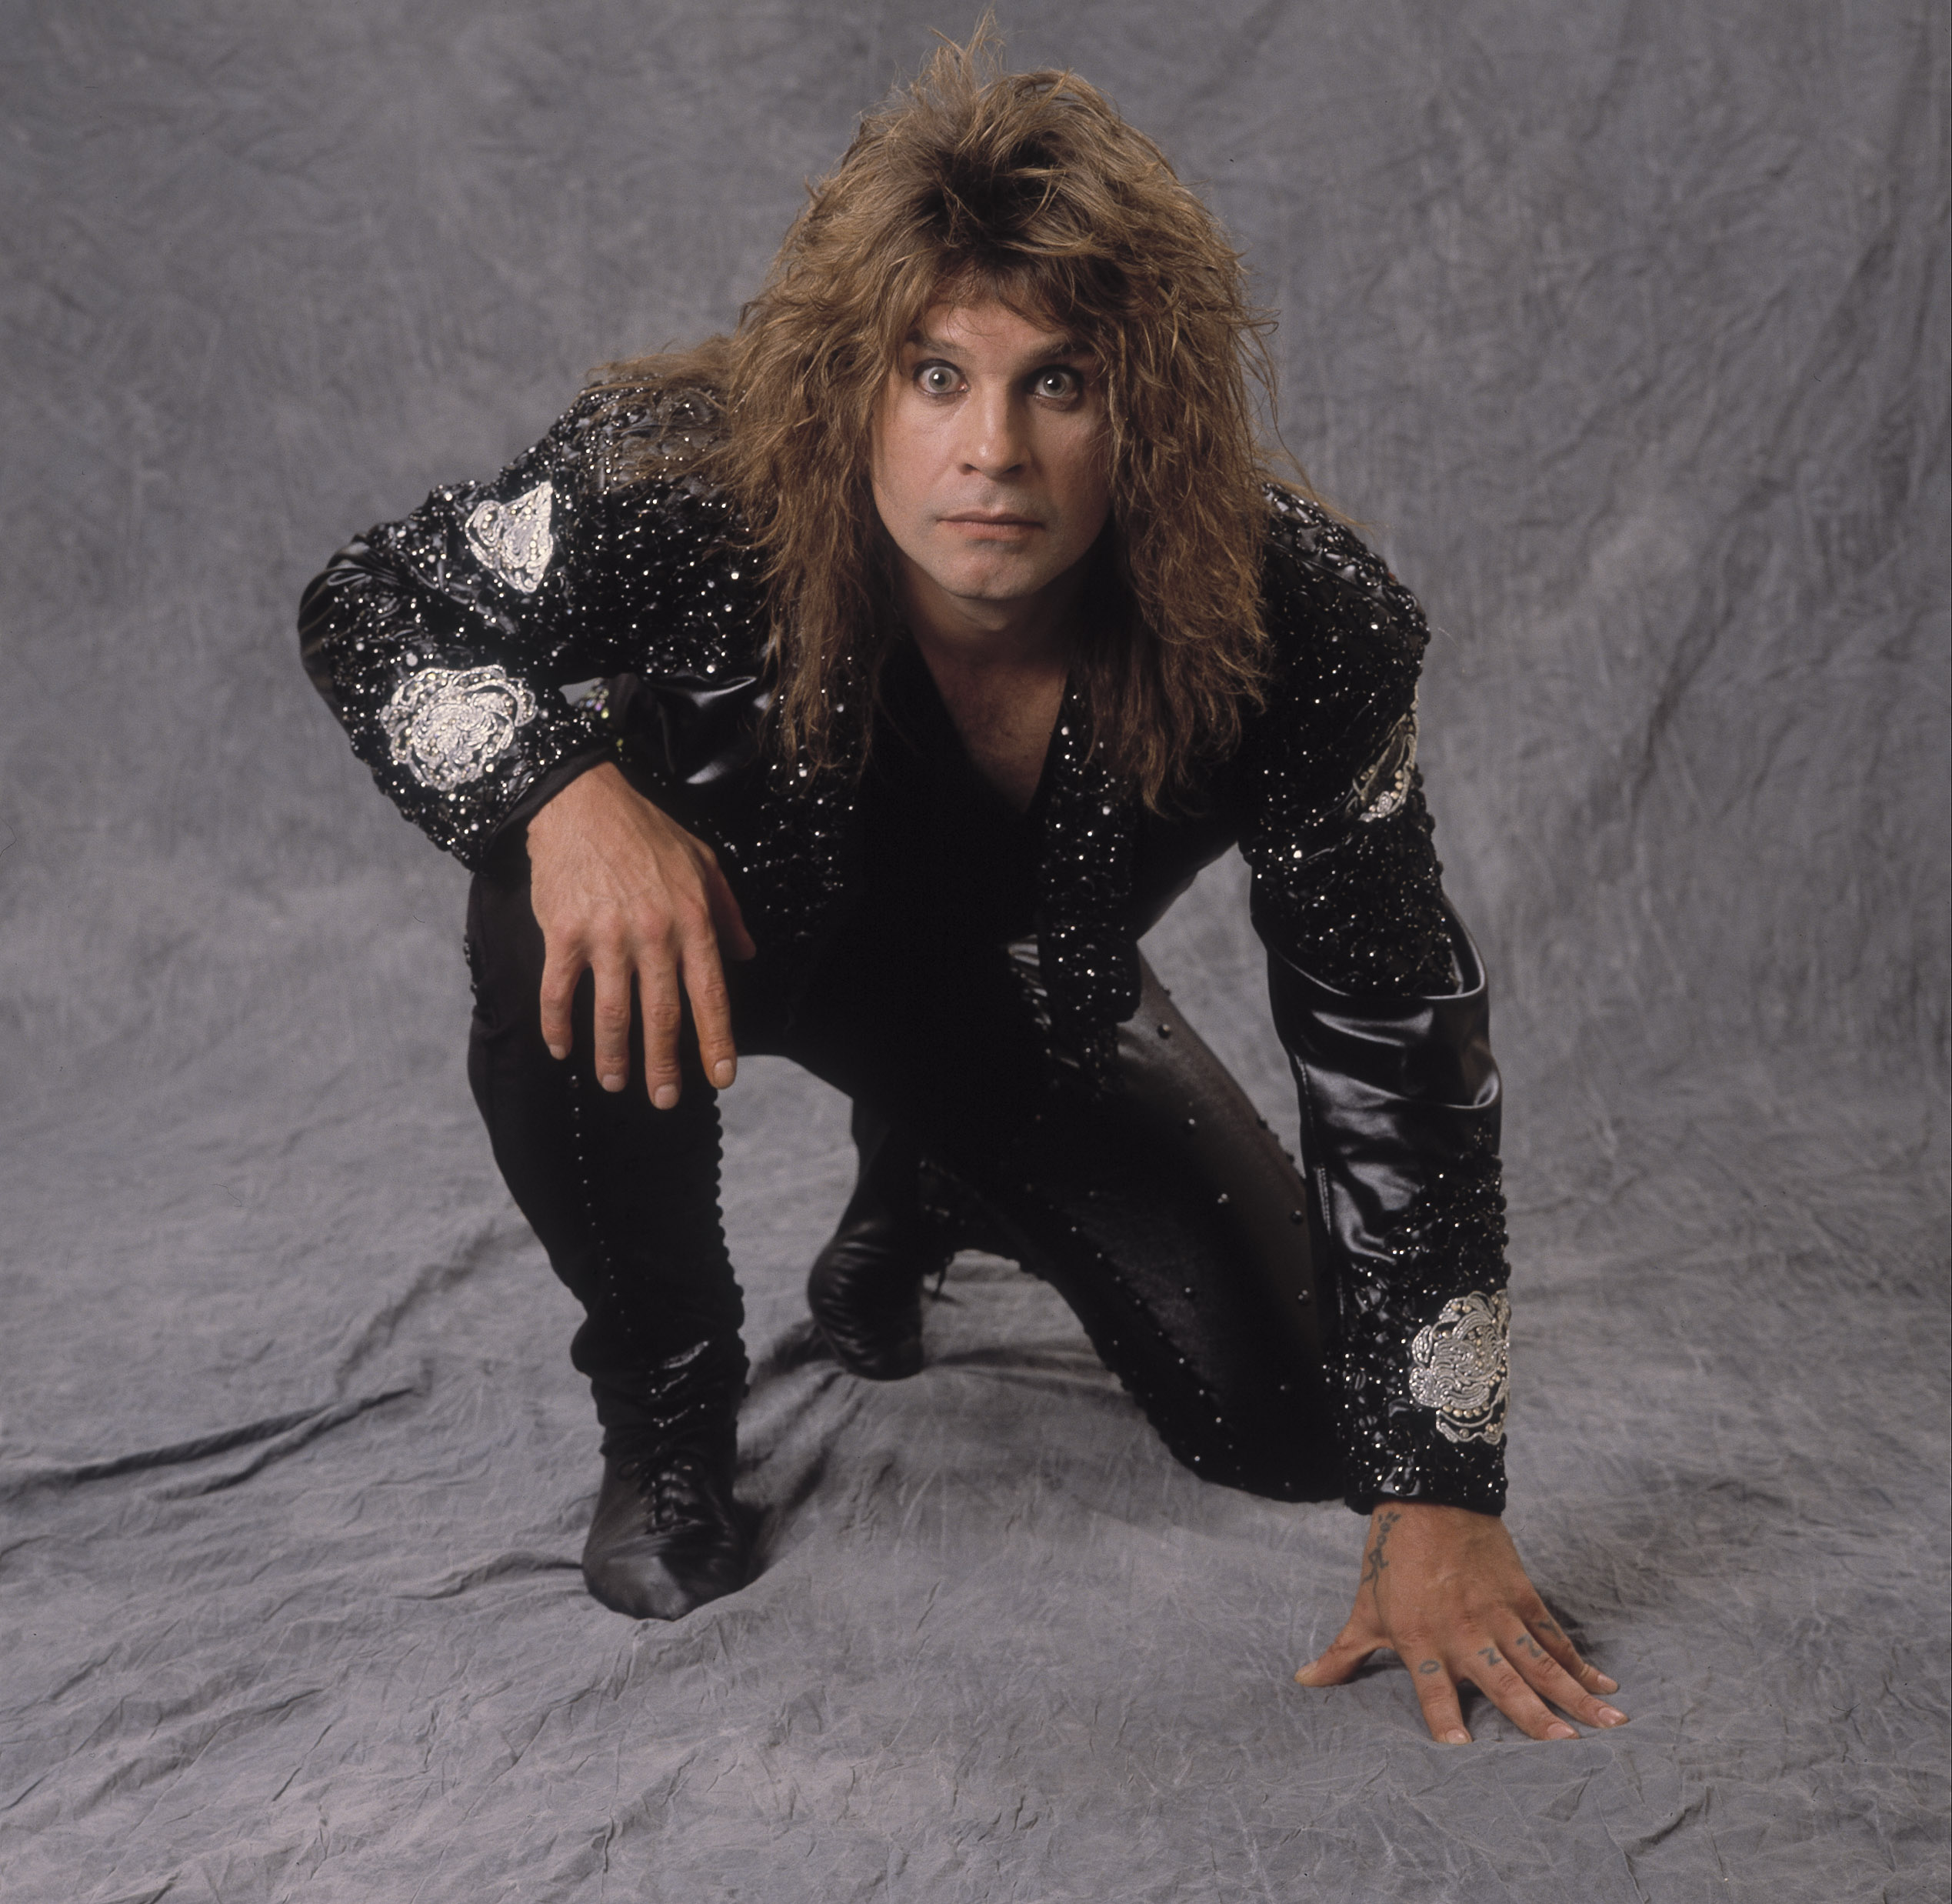 Ozzy Osbourne: Our 1986 Cover Story